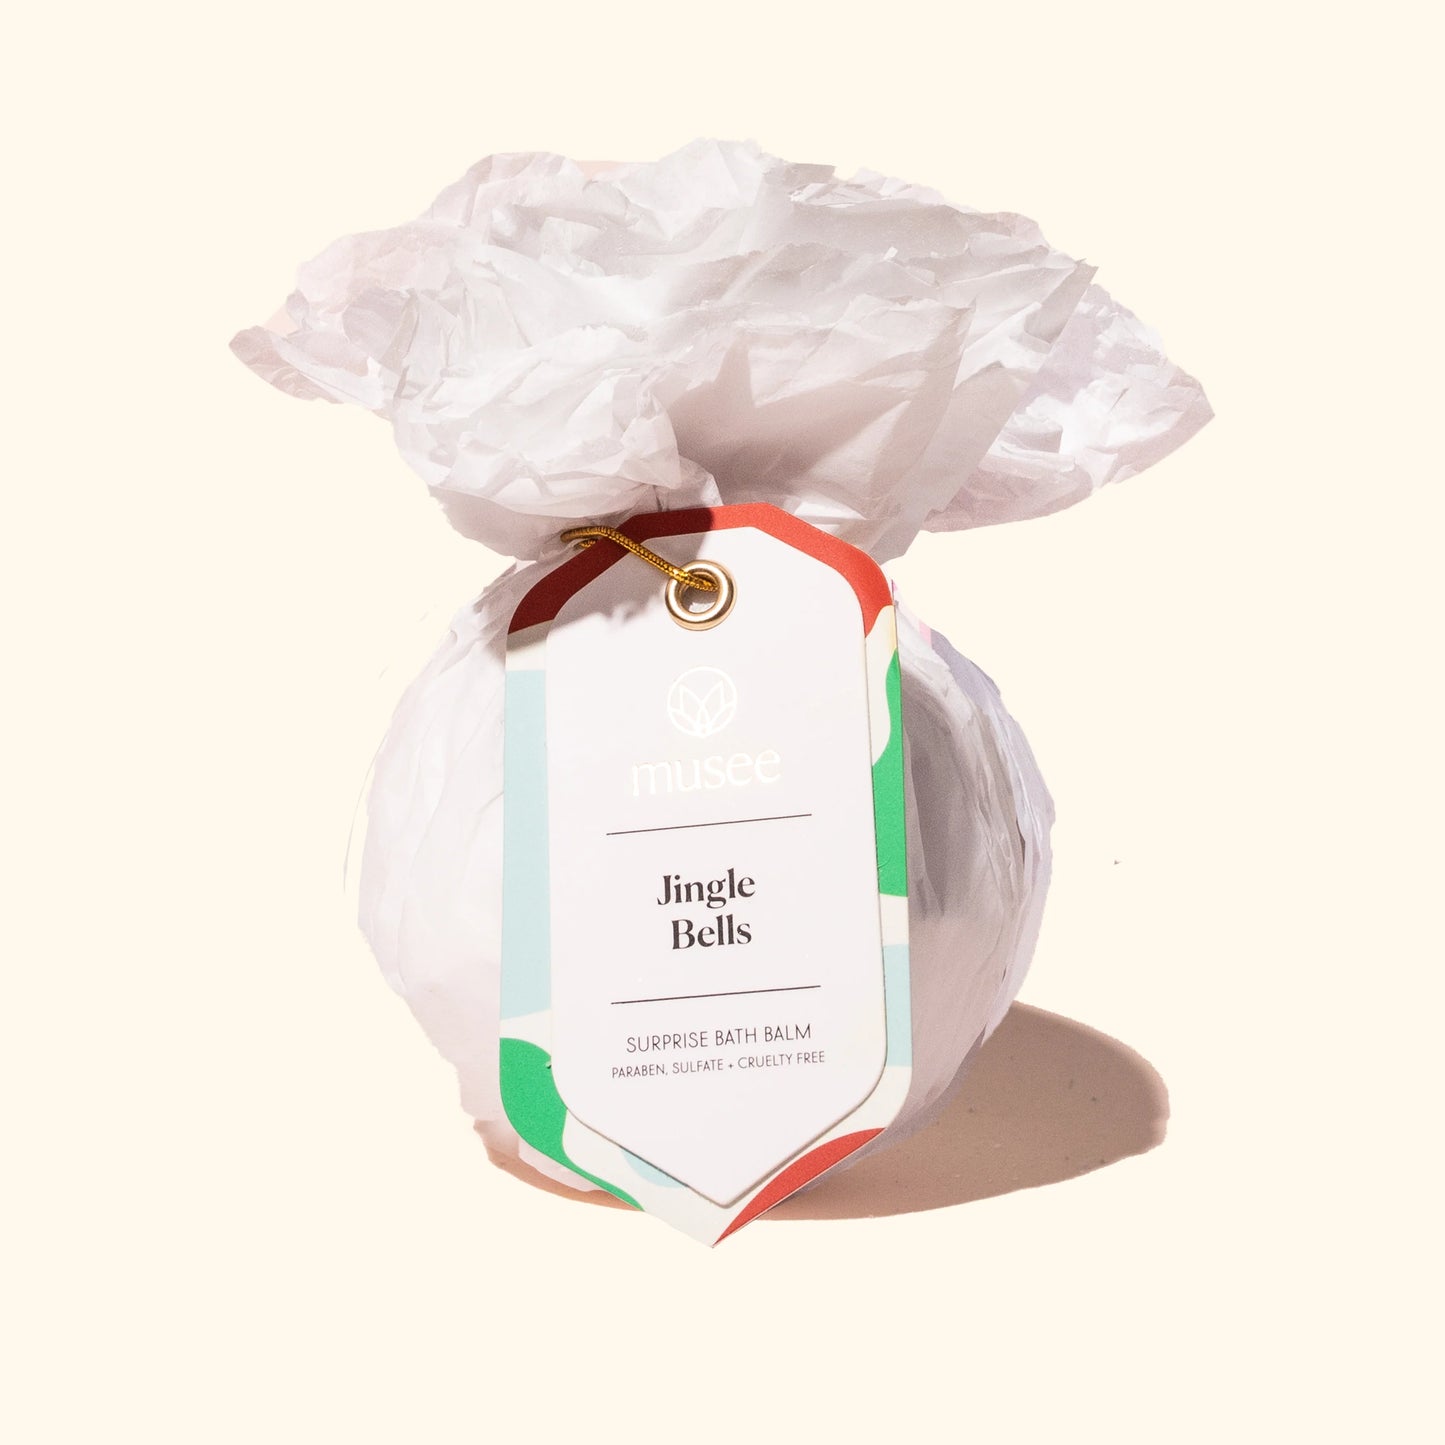 A bag of Musee Jingle Bells Surprise Bath Balms with a holiday scent.